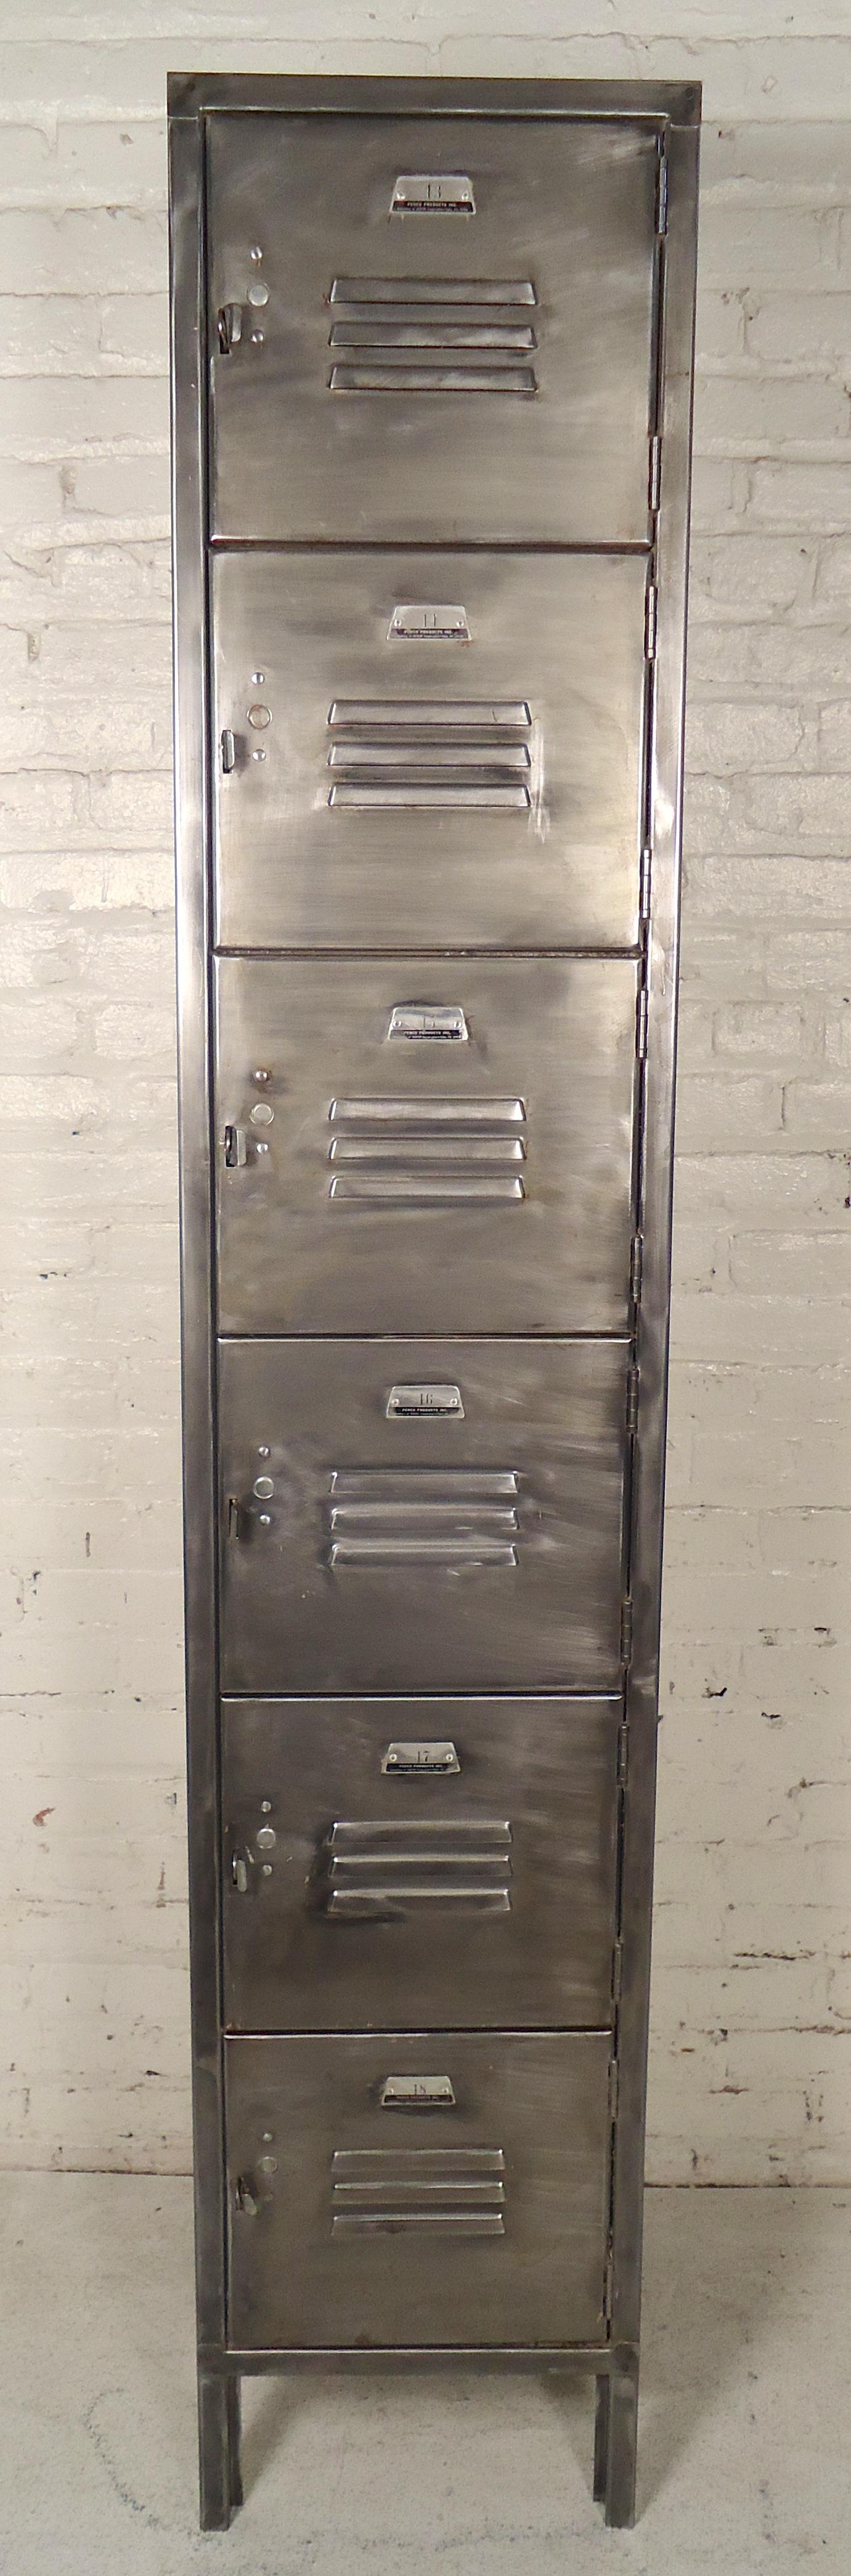 Vintage metal locker unit refinished in a bare metal style. Classic school house locker with six compartments. Great for home or office storage.

(Please confirm item location - NY or NJ - with dealer).
 